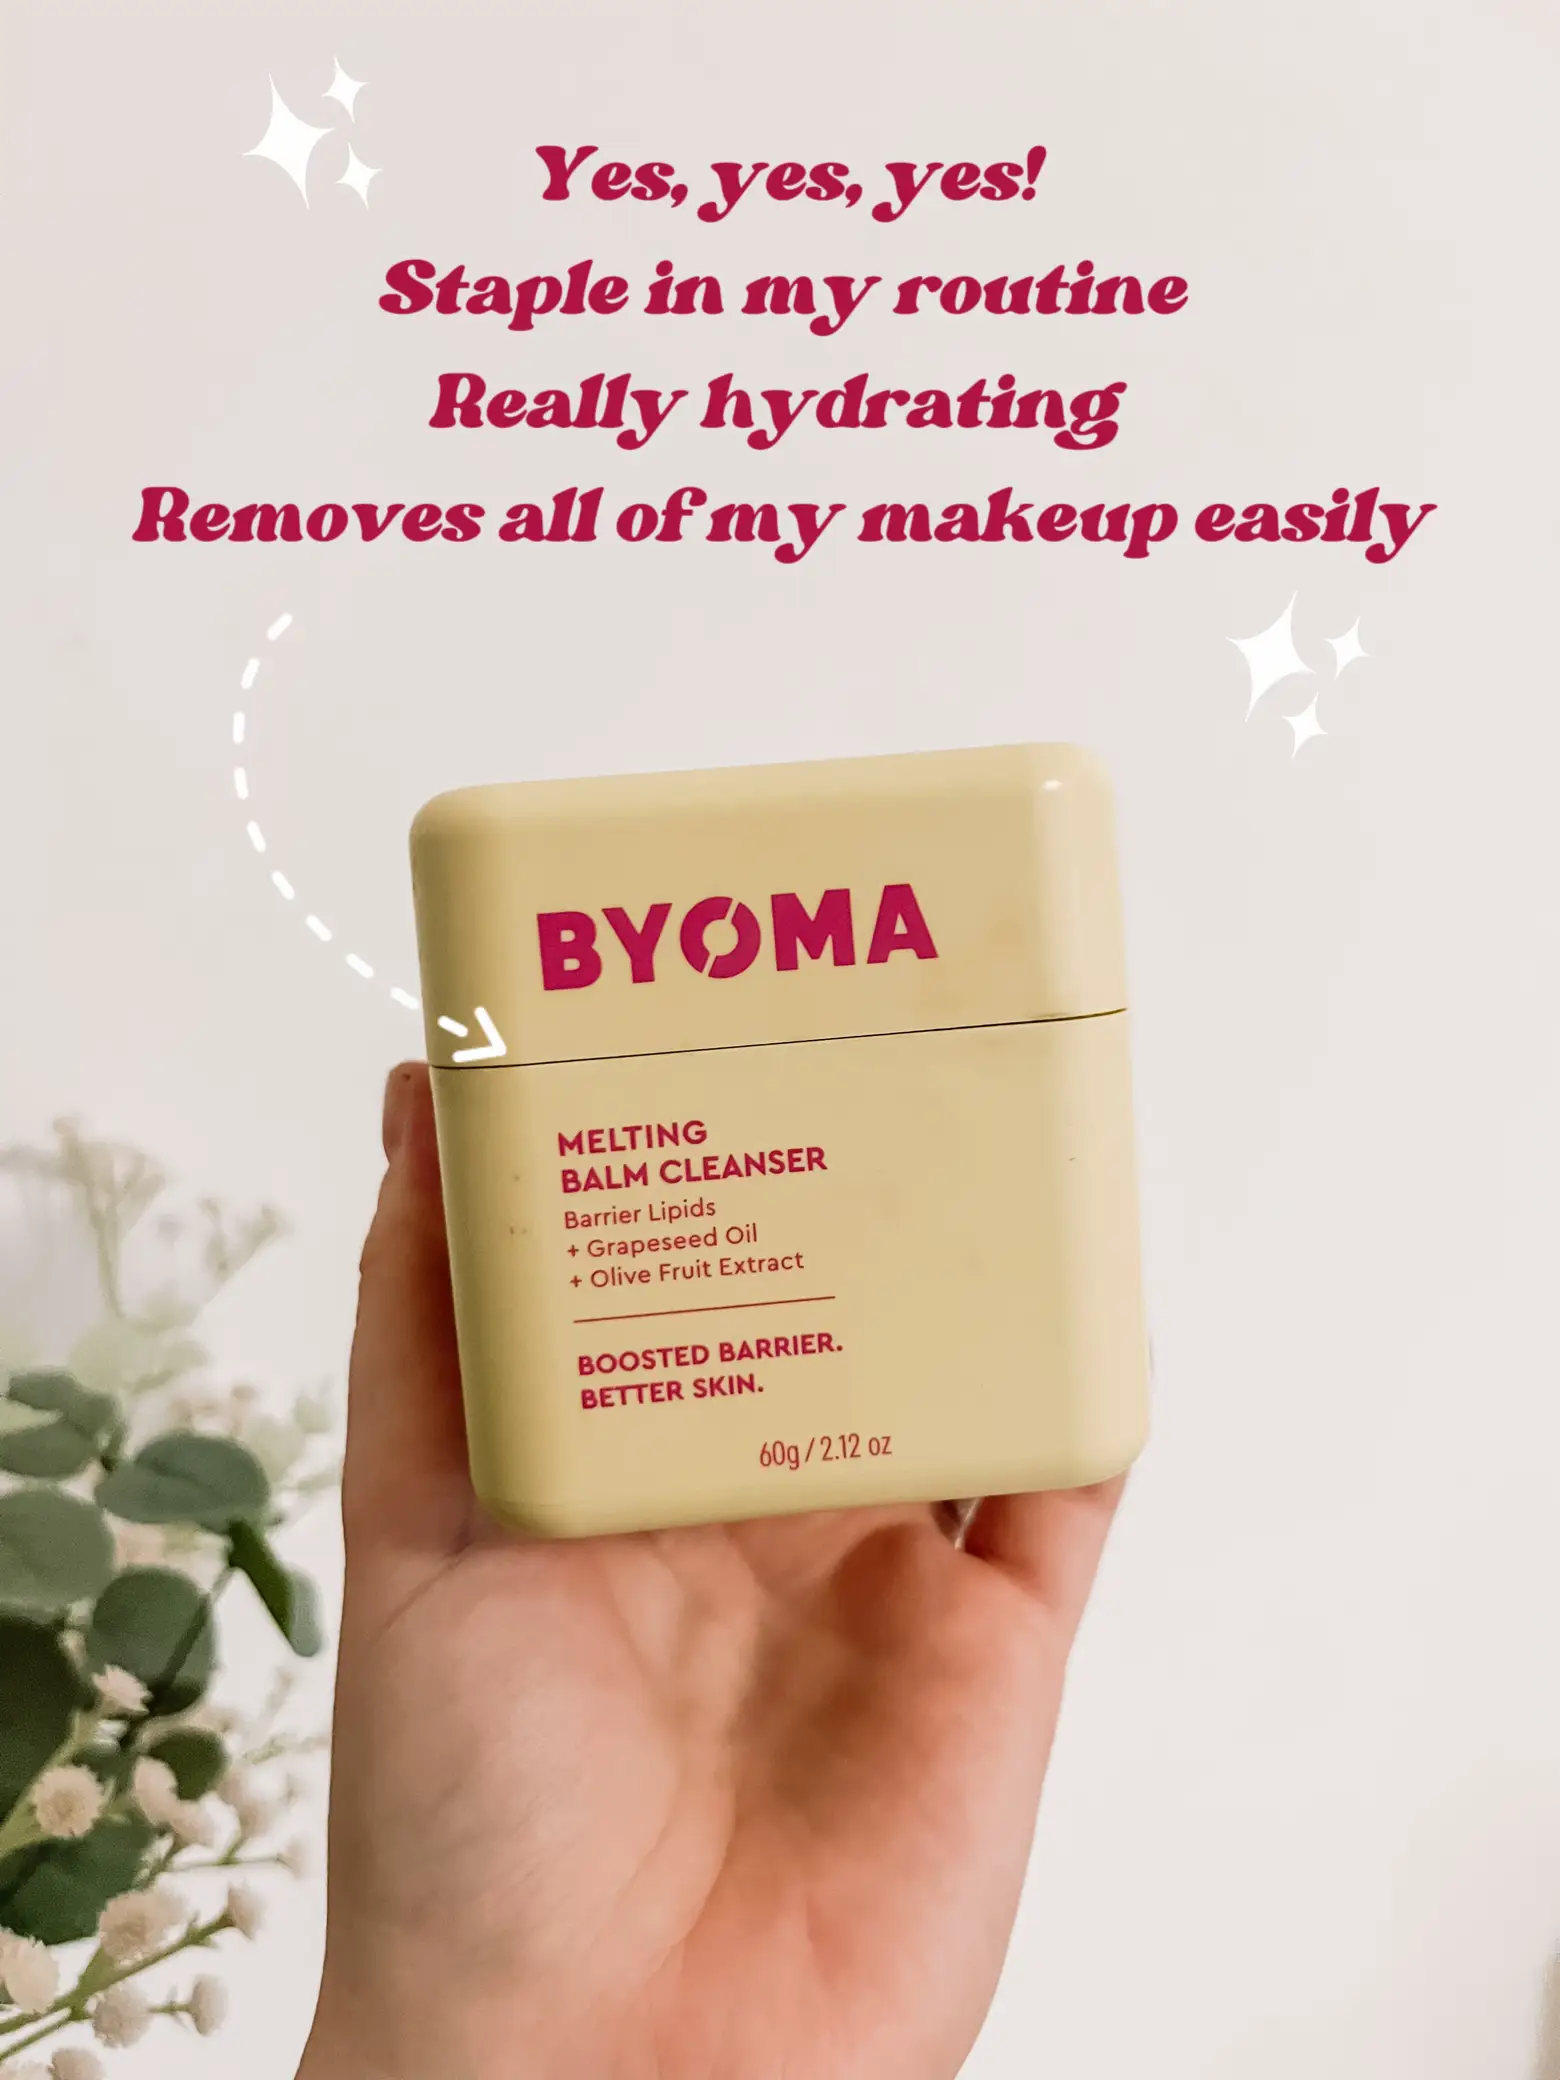 Byoma Skincare - Honest Thoughts 🌸, Gallery posted by Elizabeth Long